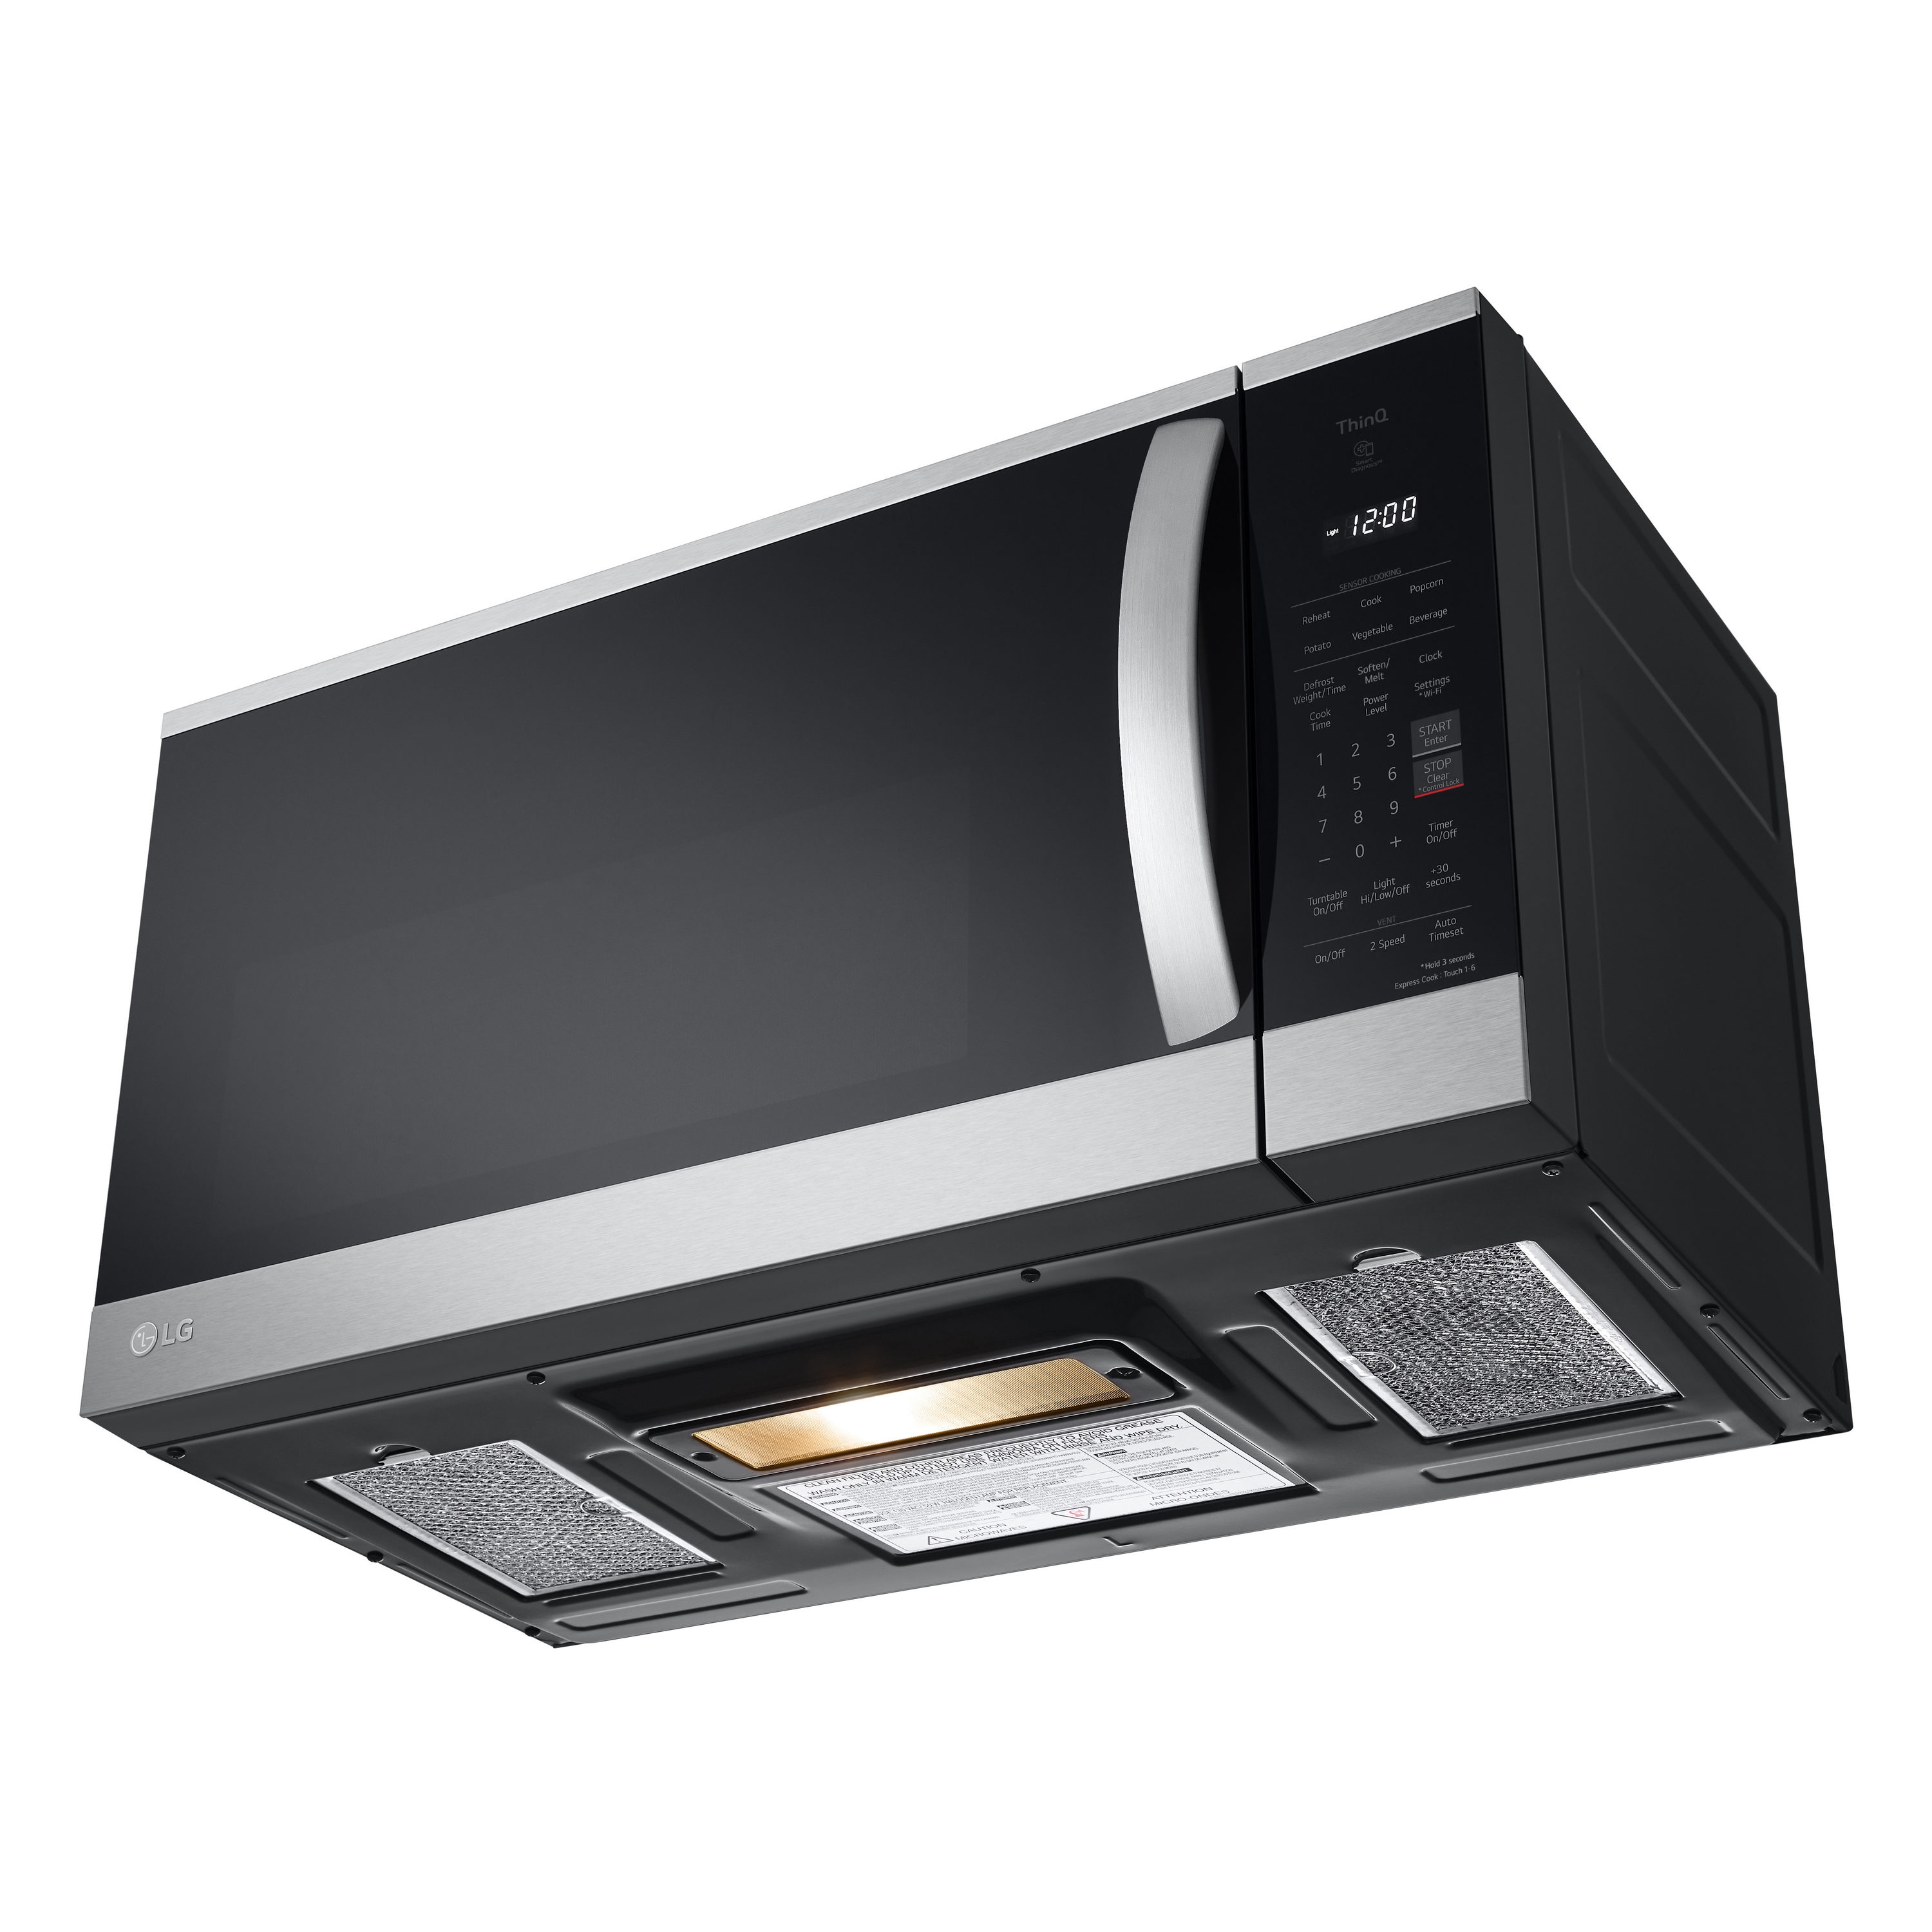 Cooking LG ft Smart Over-the-Range Sensor with Over-the-Range Stainless Microwave department the 1000-Watt at (Printproof in 1.8-cu Steel) Microwaves